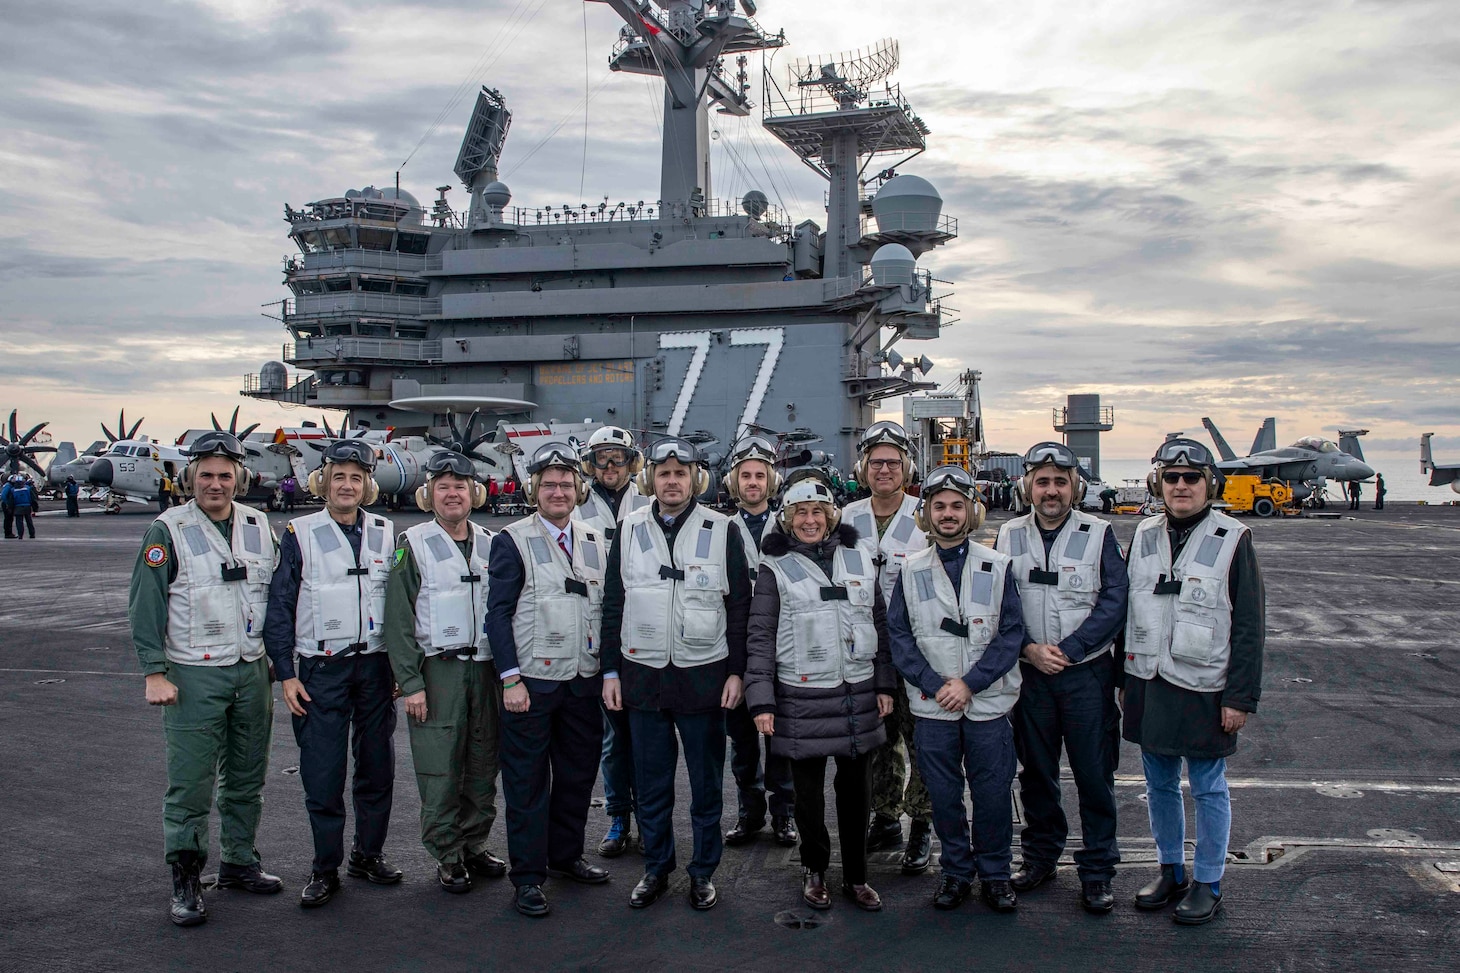 Italian senior civilian and military leadership pose for a group photo on the flight deck of the Nimitz-class aircraft carrier USS George H.W. Bush (CVN 77) during a distinguished visitor embark on the ship, Dec. 15, 2022.